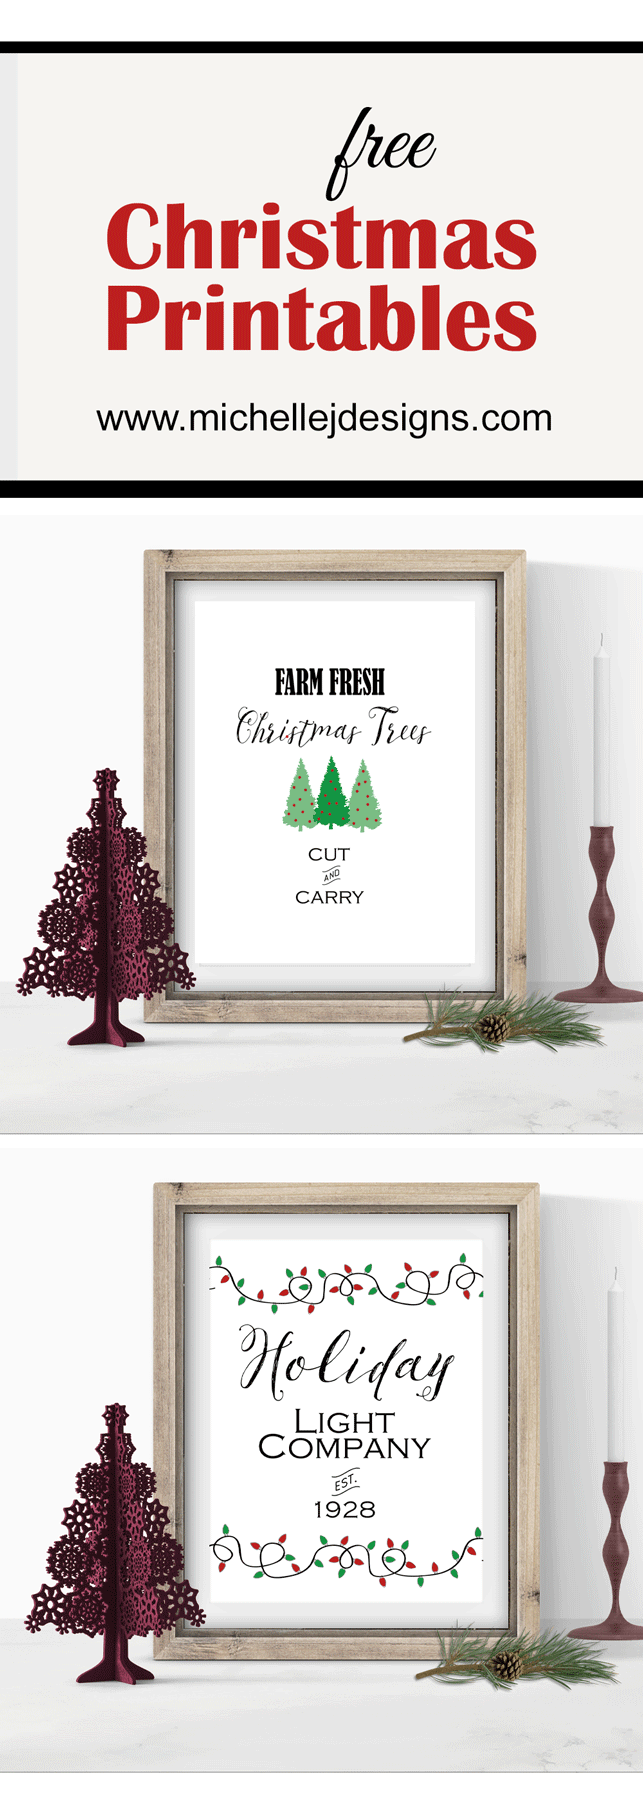 These free Christmas Printables are perfect for your DIY home decor. Download, print and frame for perfect artwork every time. www.michellejdesigns.com